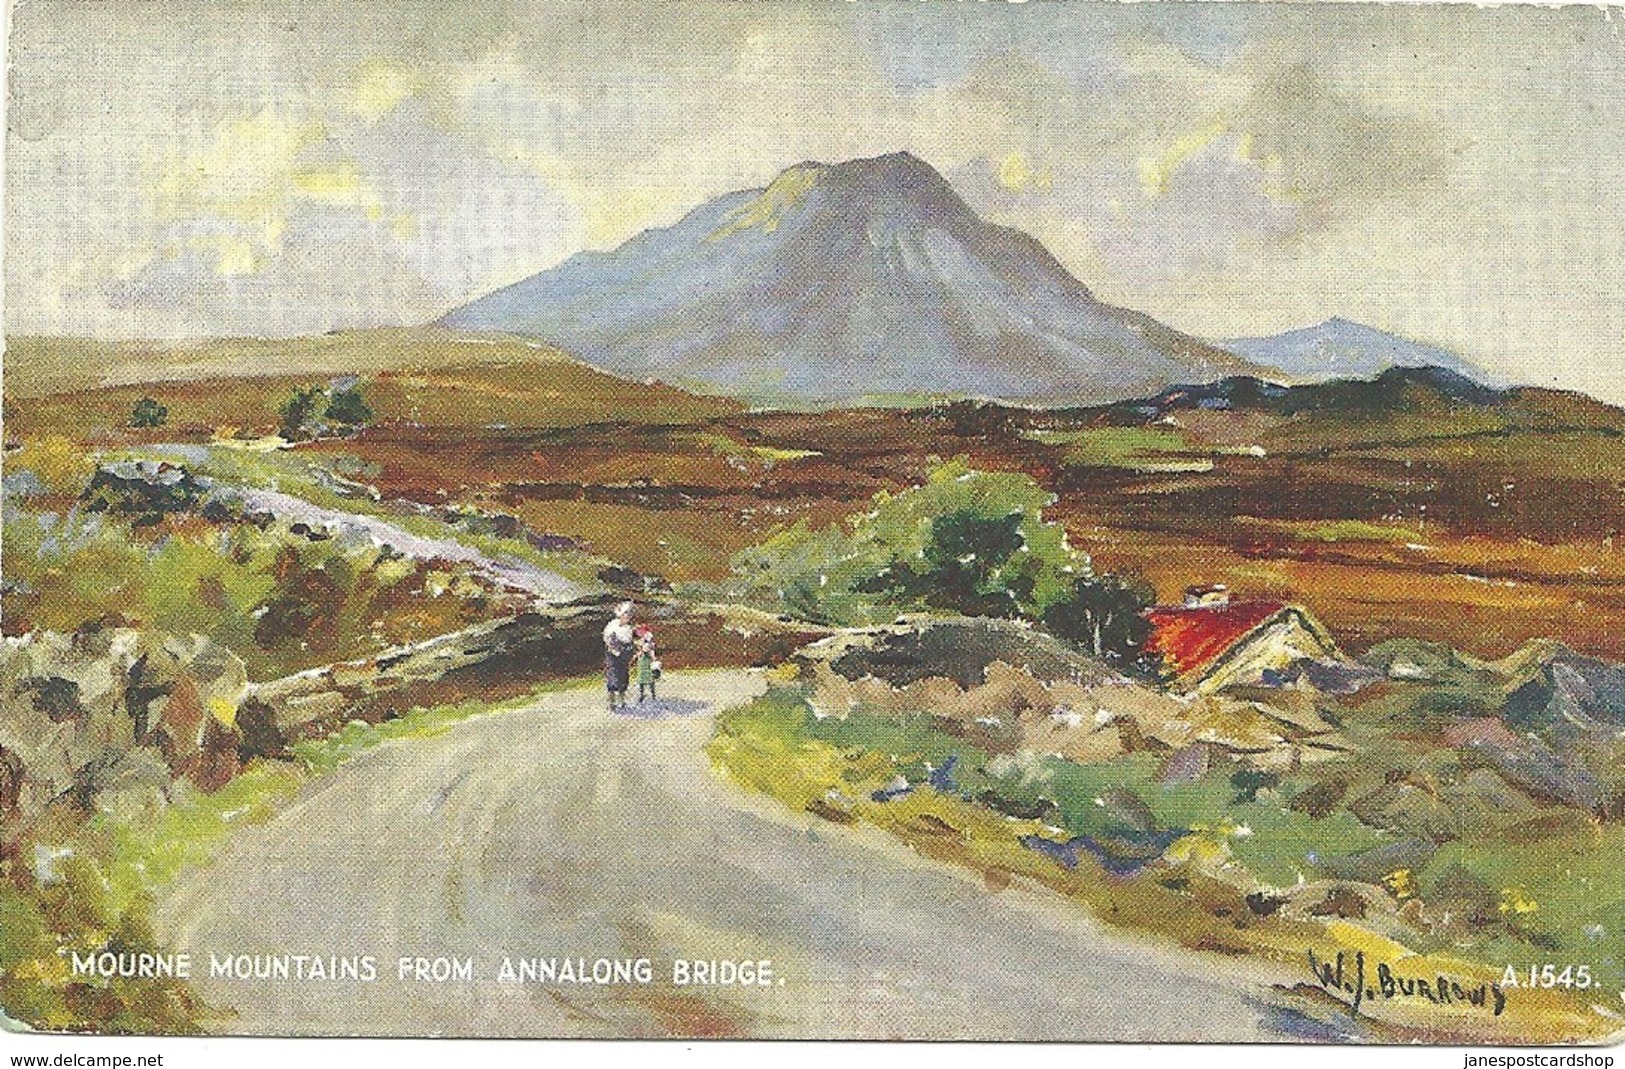 ART CARD - BY W.J. BURROWS - MOURNE MOUNTAINS FROM ANNALONG BRIDGE - COUNTY DOWN - Down